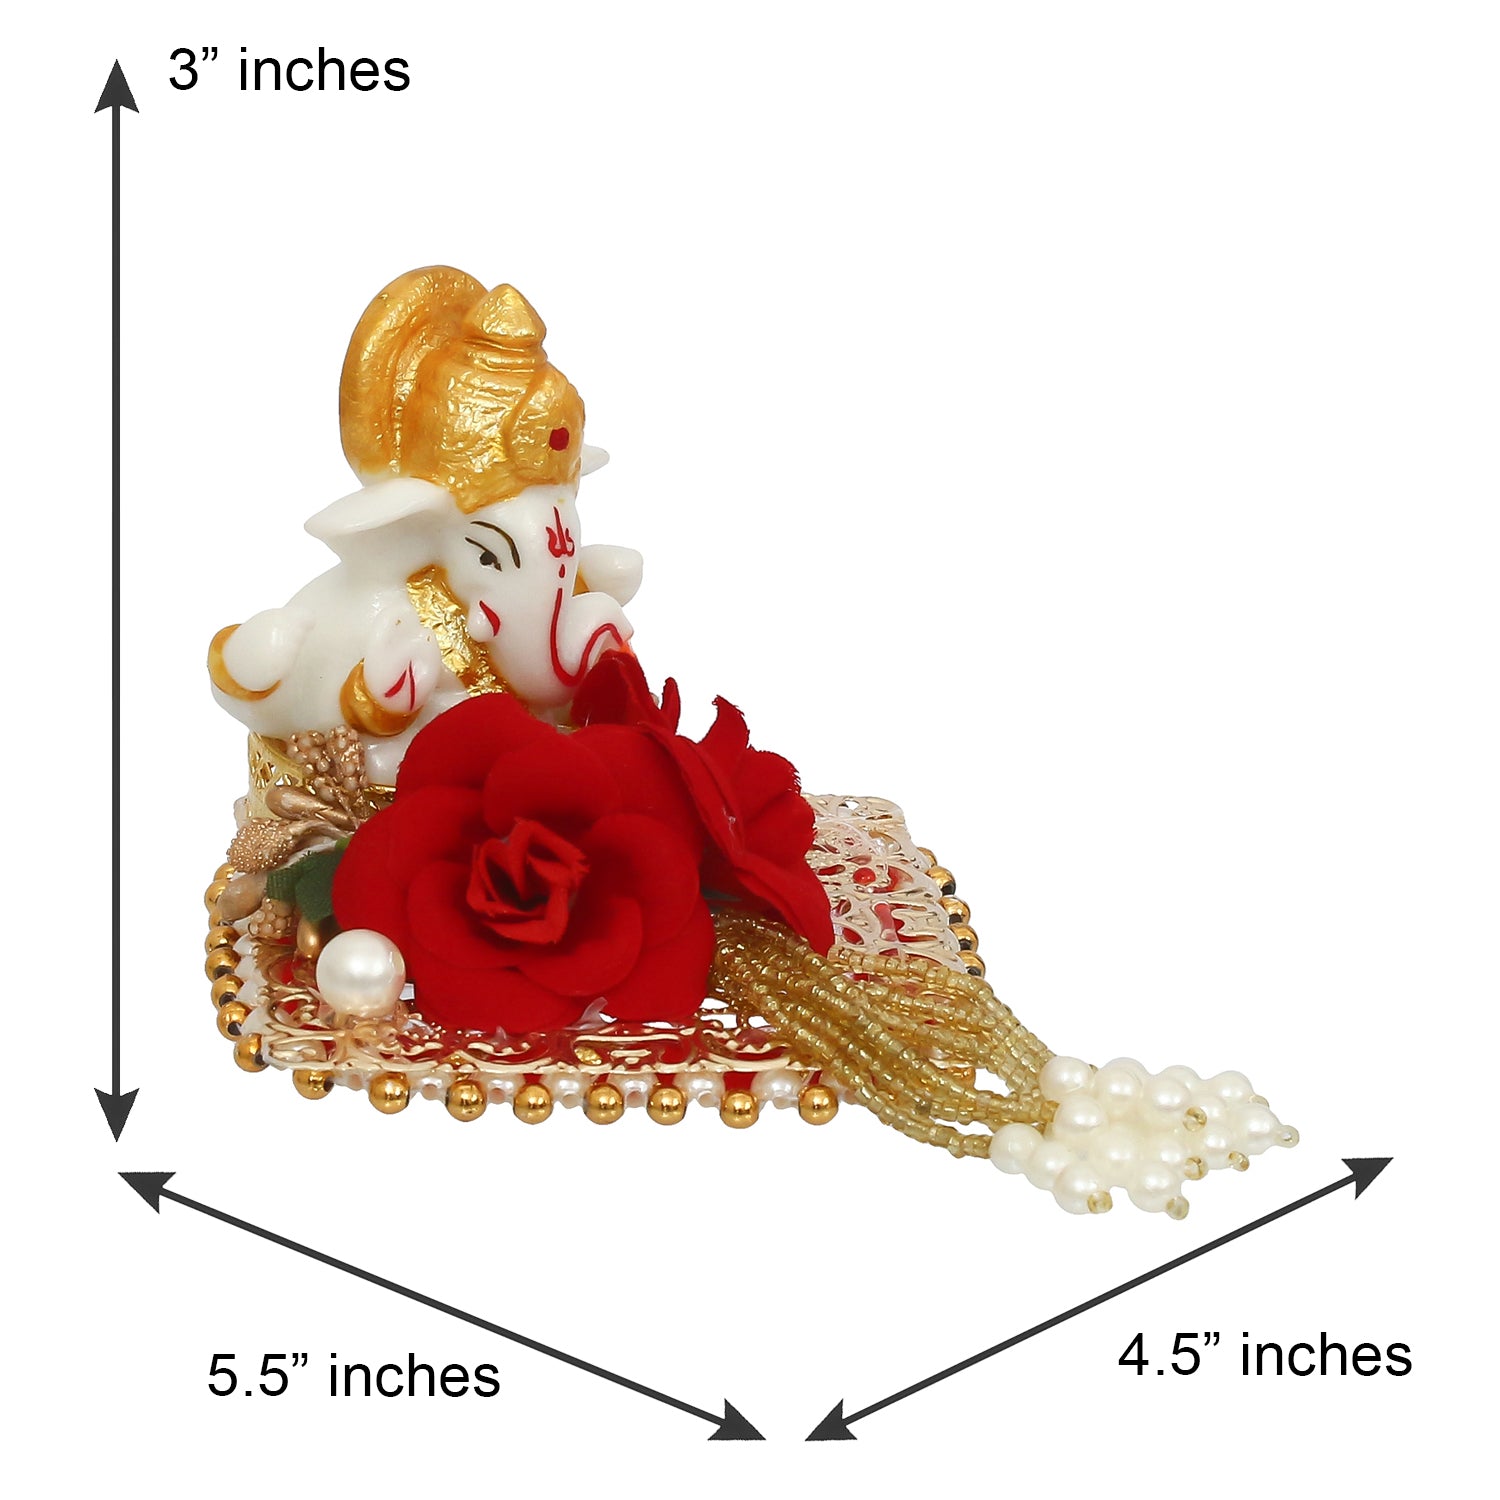 Polyresin Lord Ganesha Idol on Decorative Handcrafted Plate for Home and Car Dashboard 2